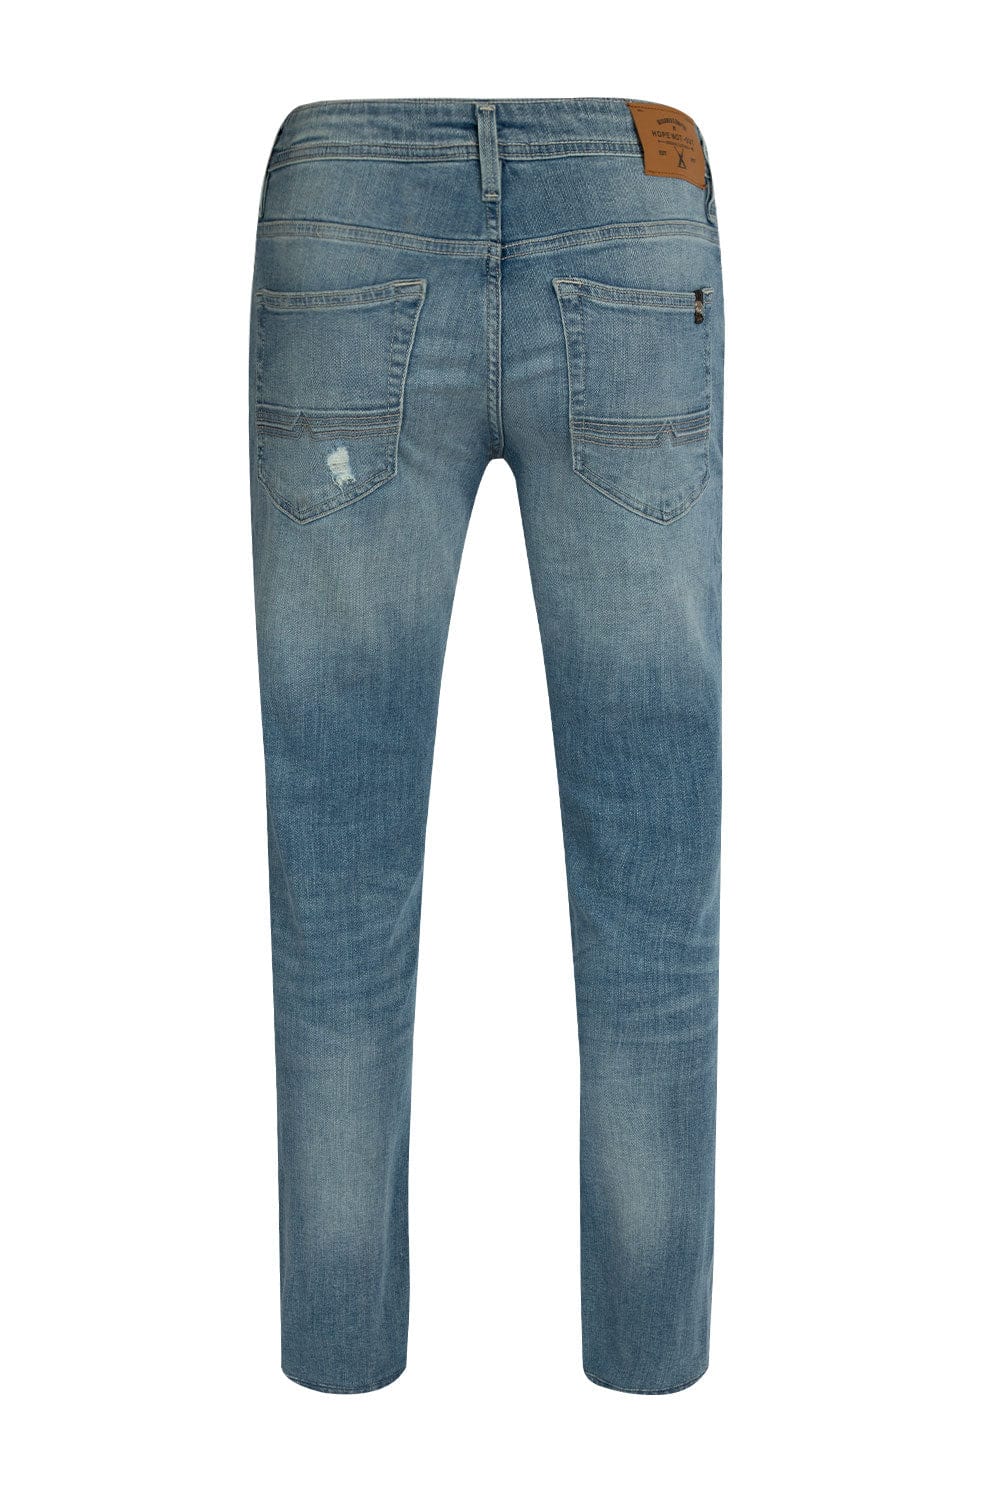 Hope Not Out by Shahid Afridi Men Jeans High Fashion Slim Fit Denim